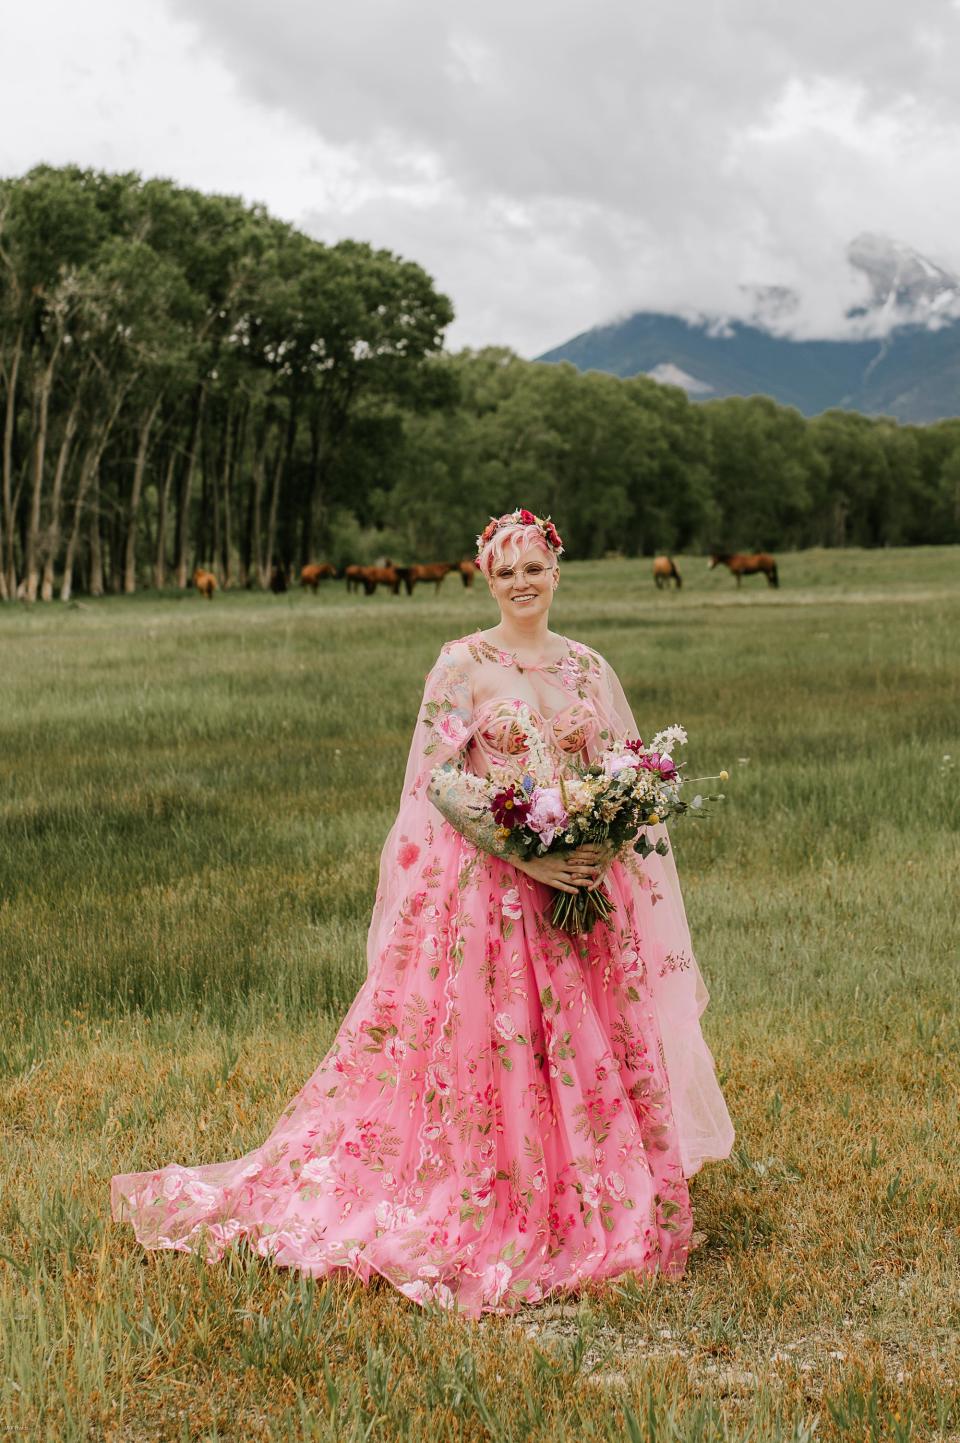 A bride in a pink, floral wedding dress stands in a field with horses.